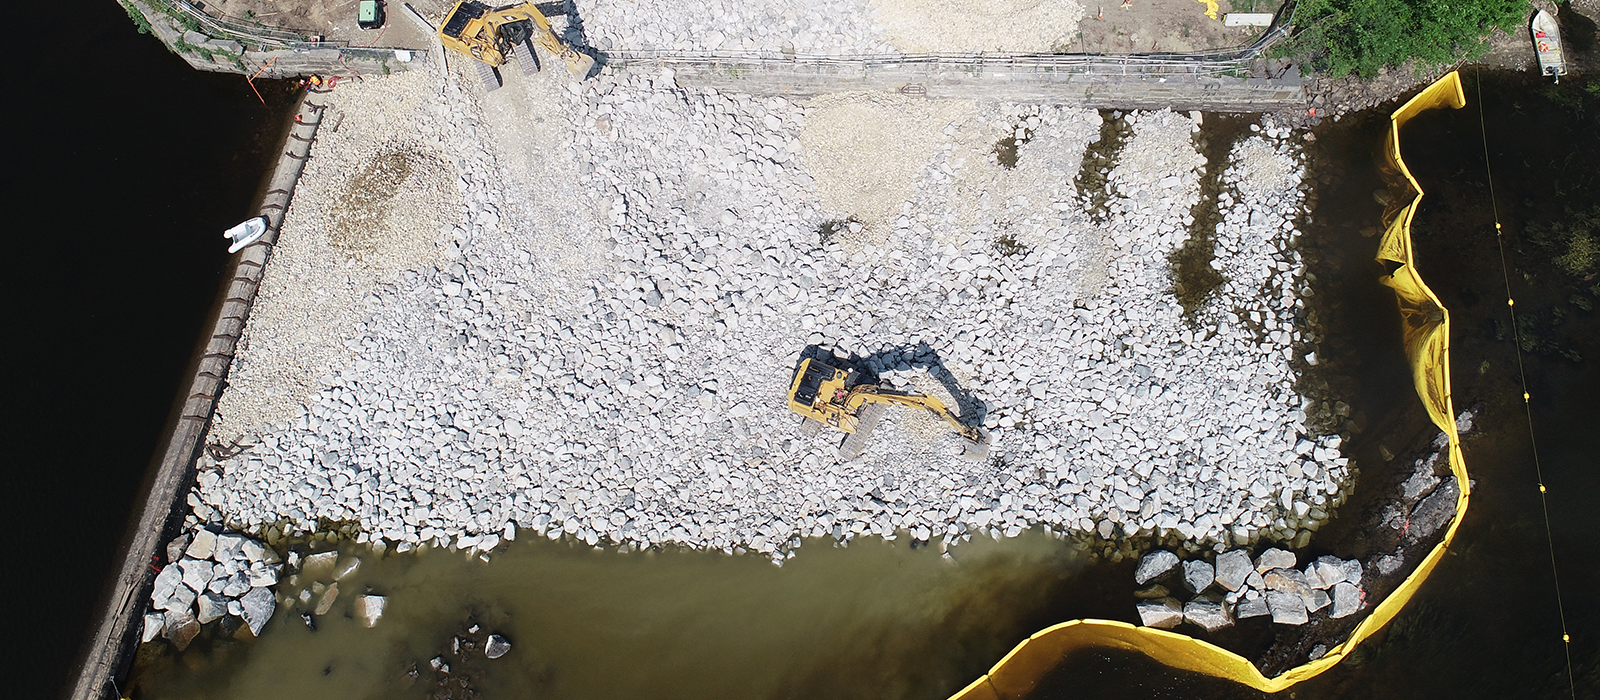 Aerial View Of Excavator Lifting And Moving Large Rocks At Saco Fishway